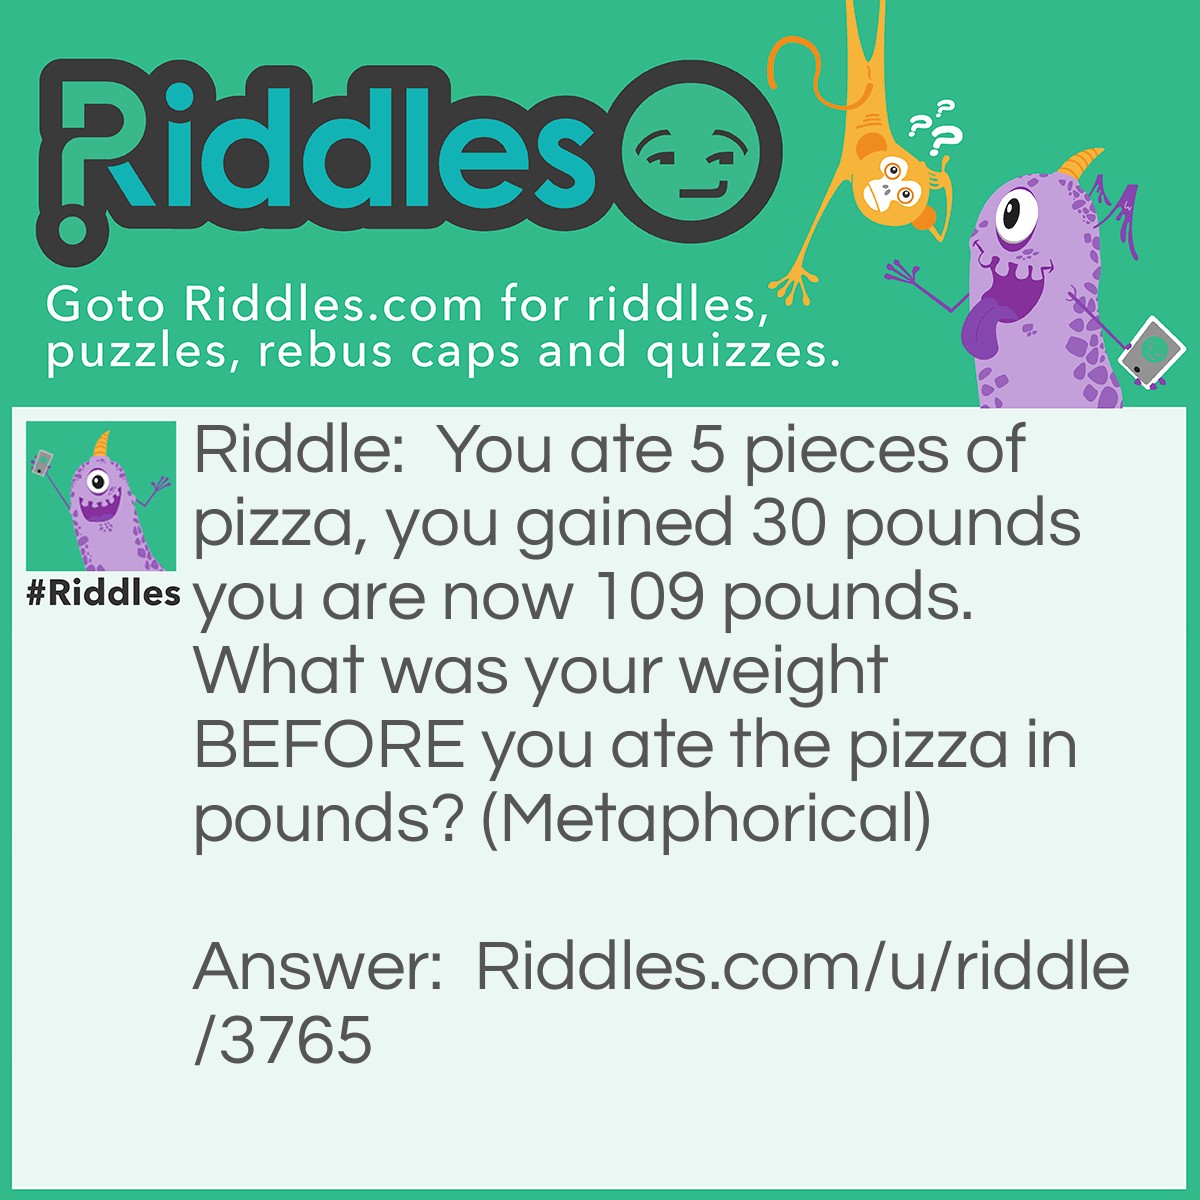 Riddle: You ate 5 pieces of pizza, you gained 30 pounds you are now 109 pounds. What was your weight BEFORE you ate the pizza in pounds? (Metaphorical) Answer: 79 pounds (Metaphorically, impossible to gain weight that fast).